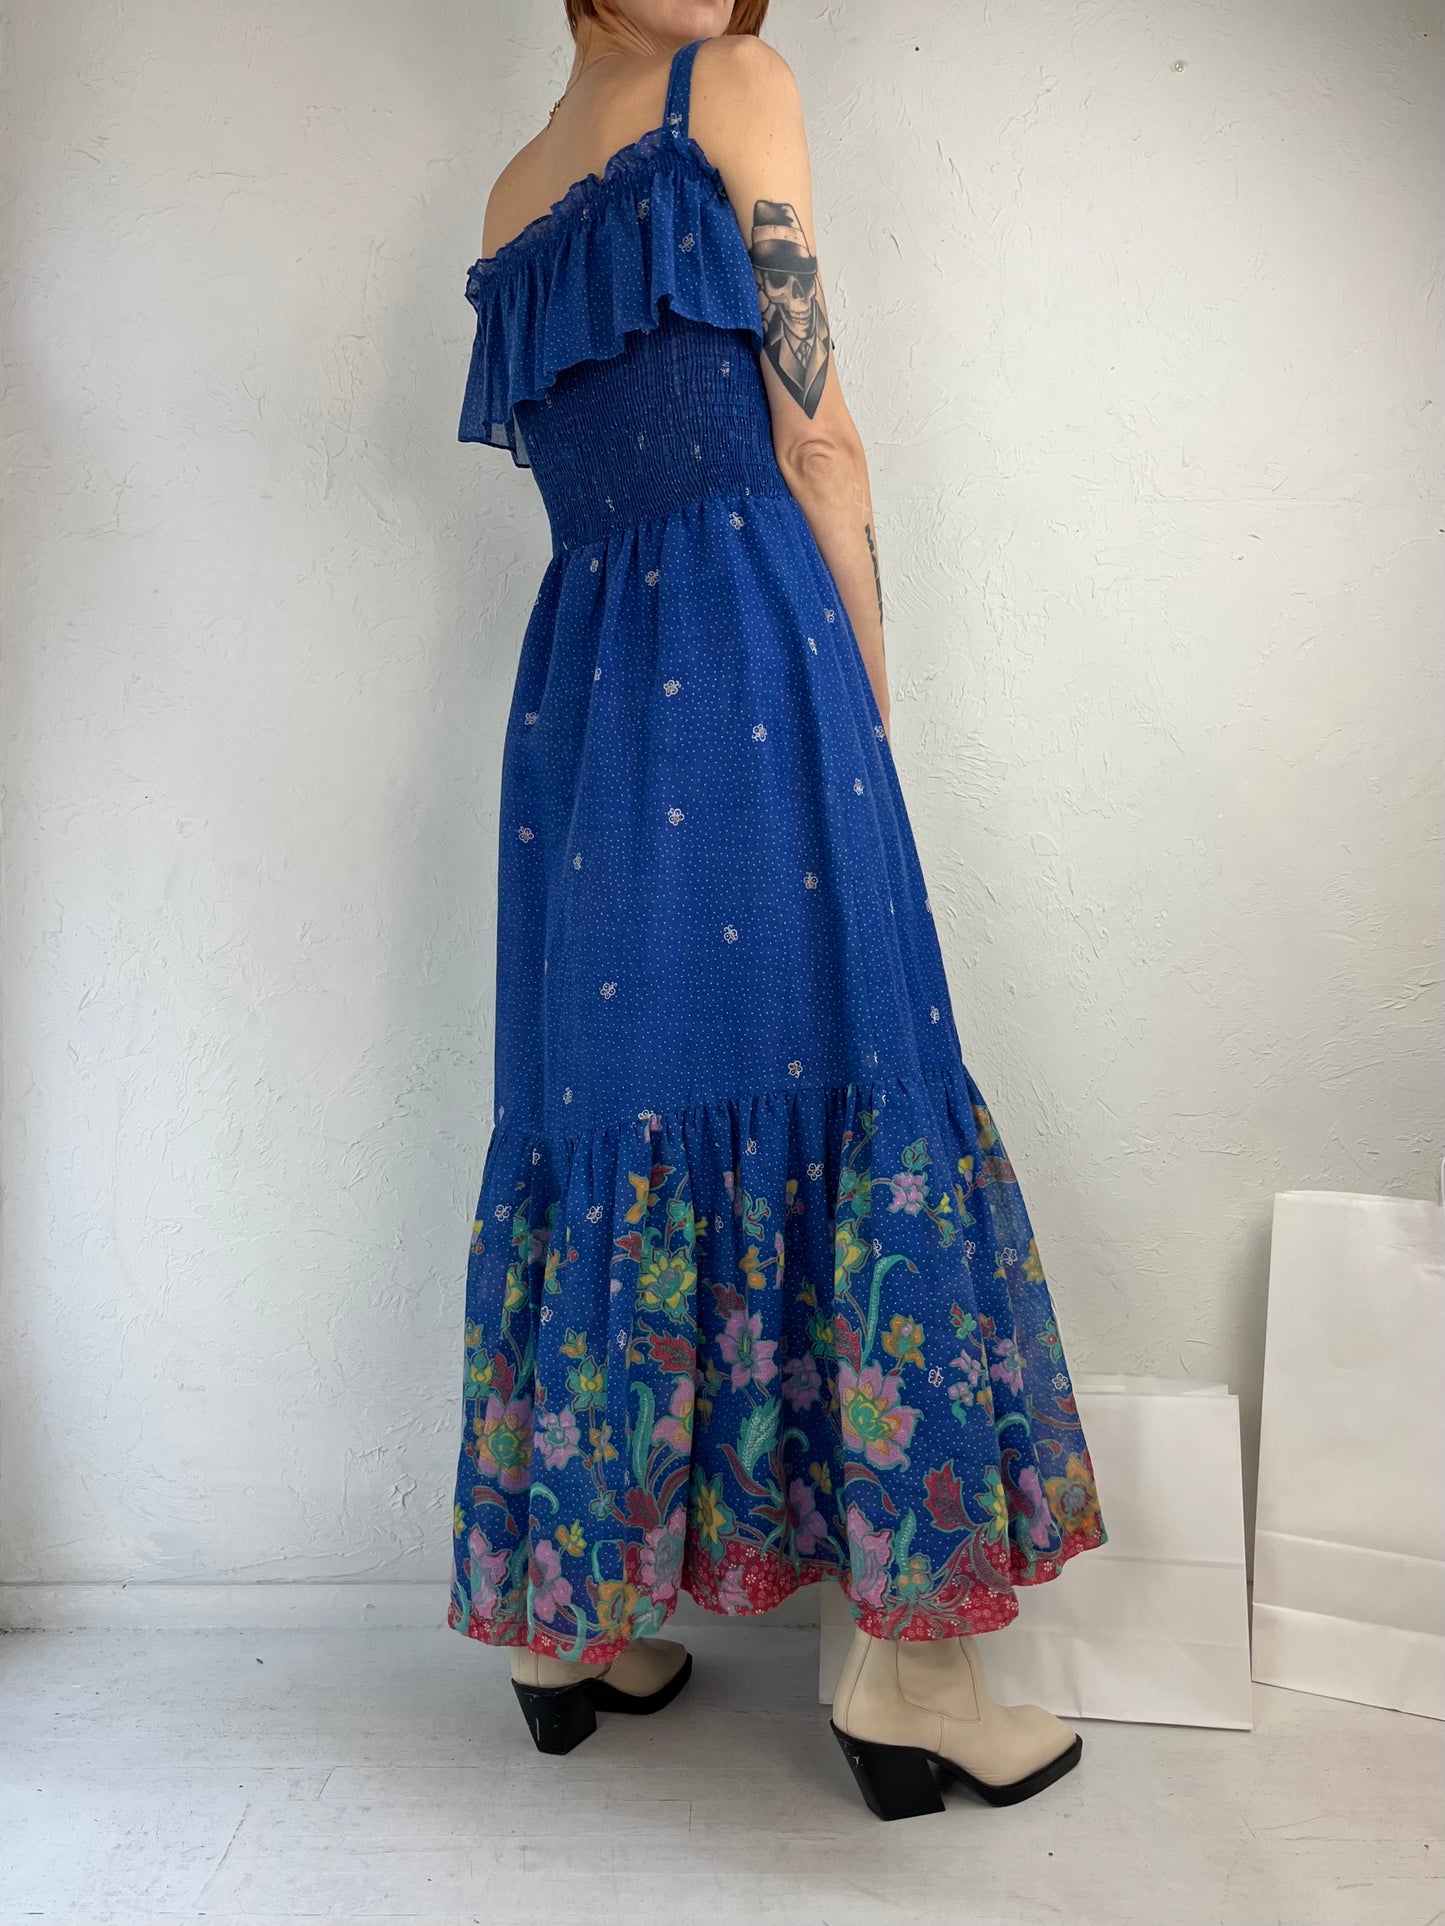 70s Blue Floral Print Peasant Dress / Small